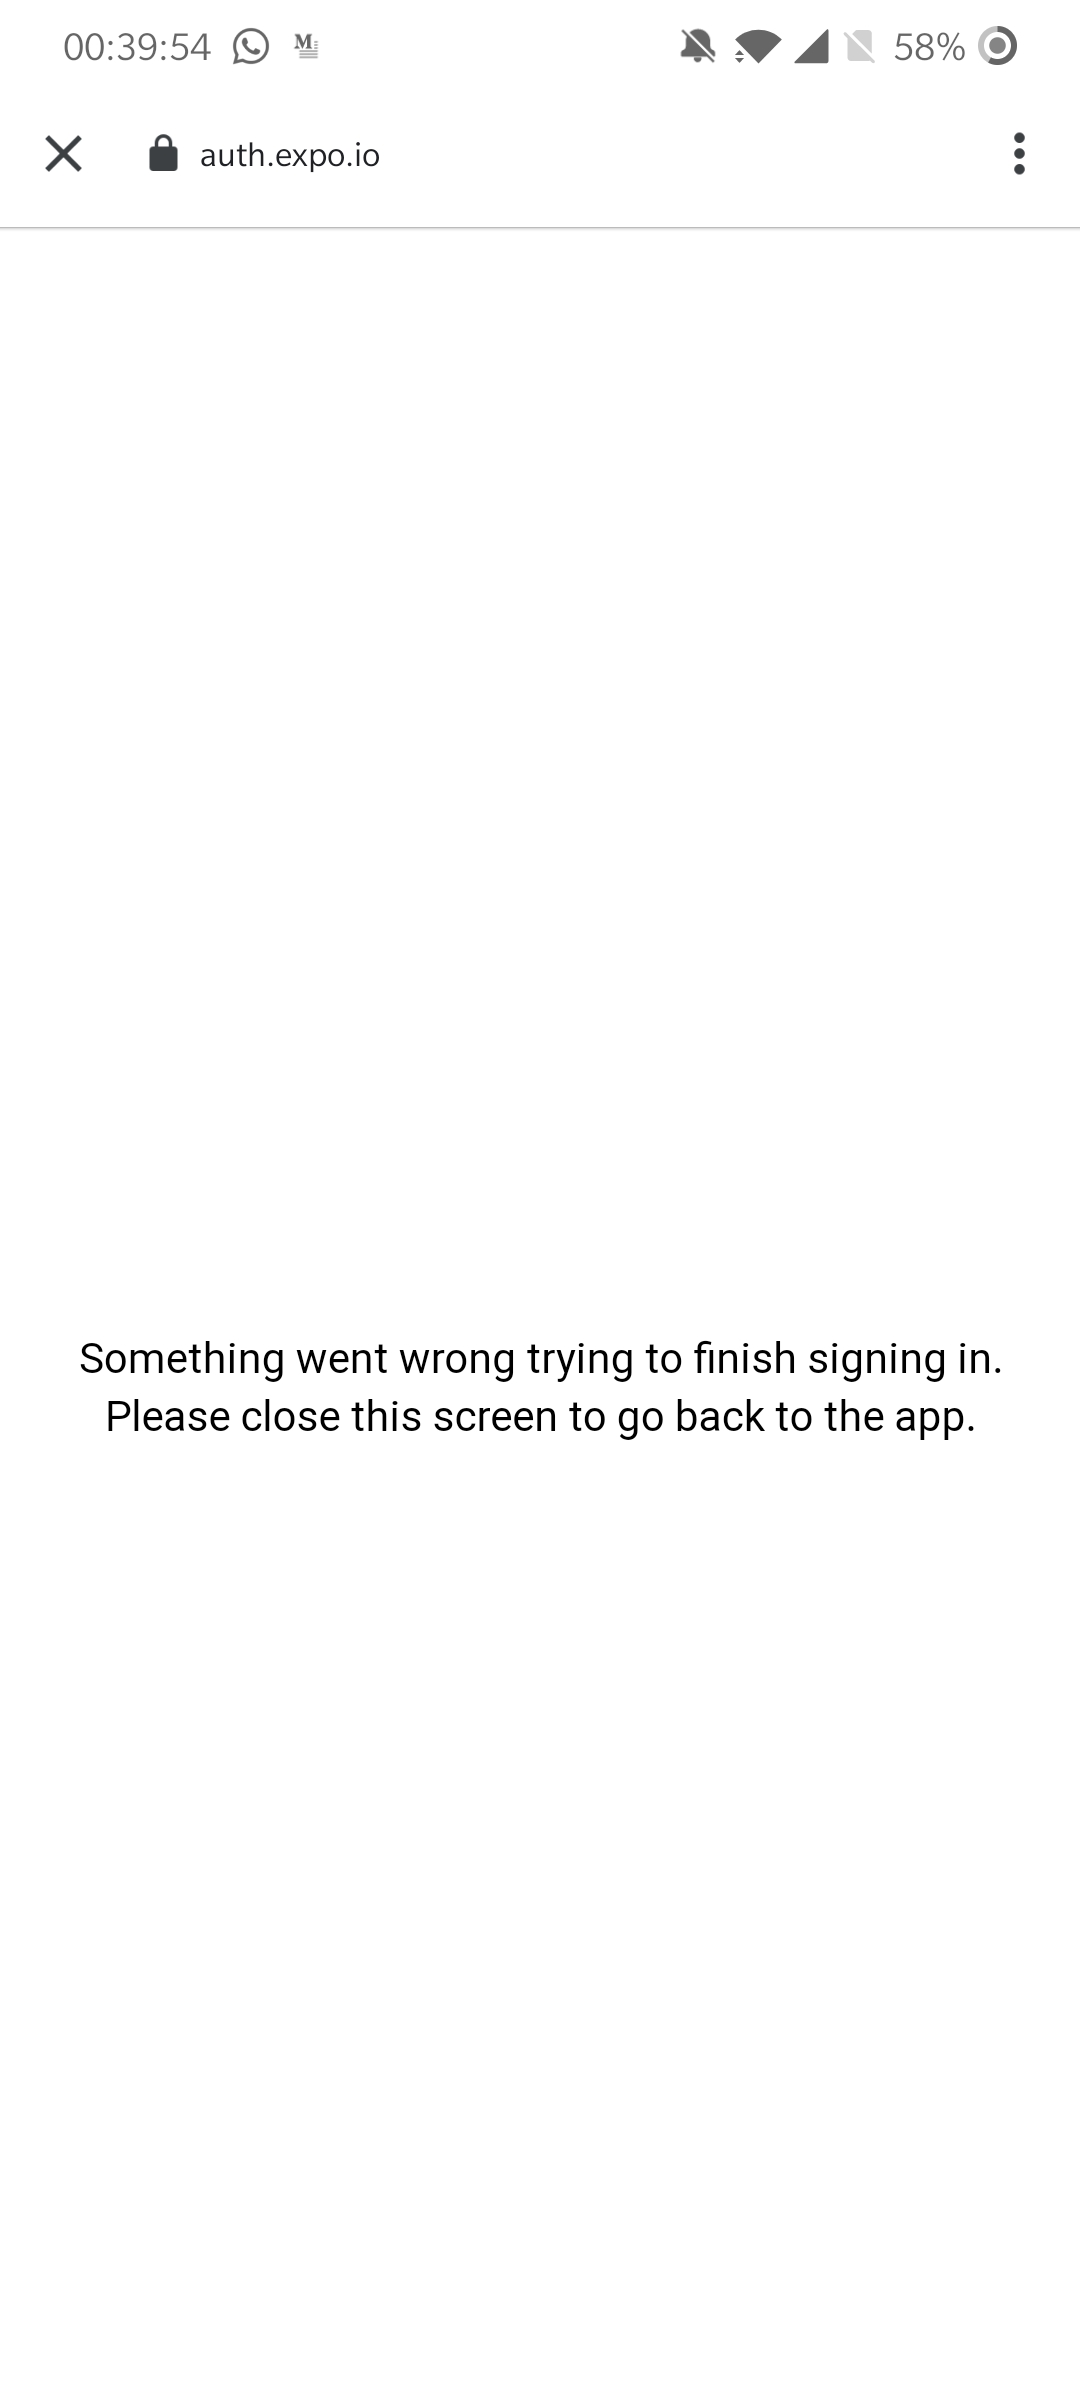 Error page on the phone showing "Something went wrong trying to finish signing in. Please close this creen to go back to the app."